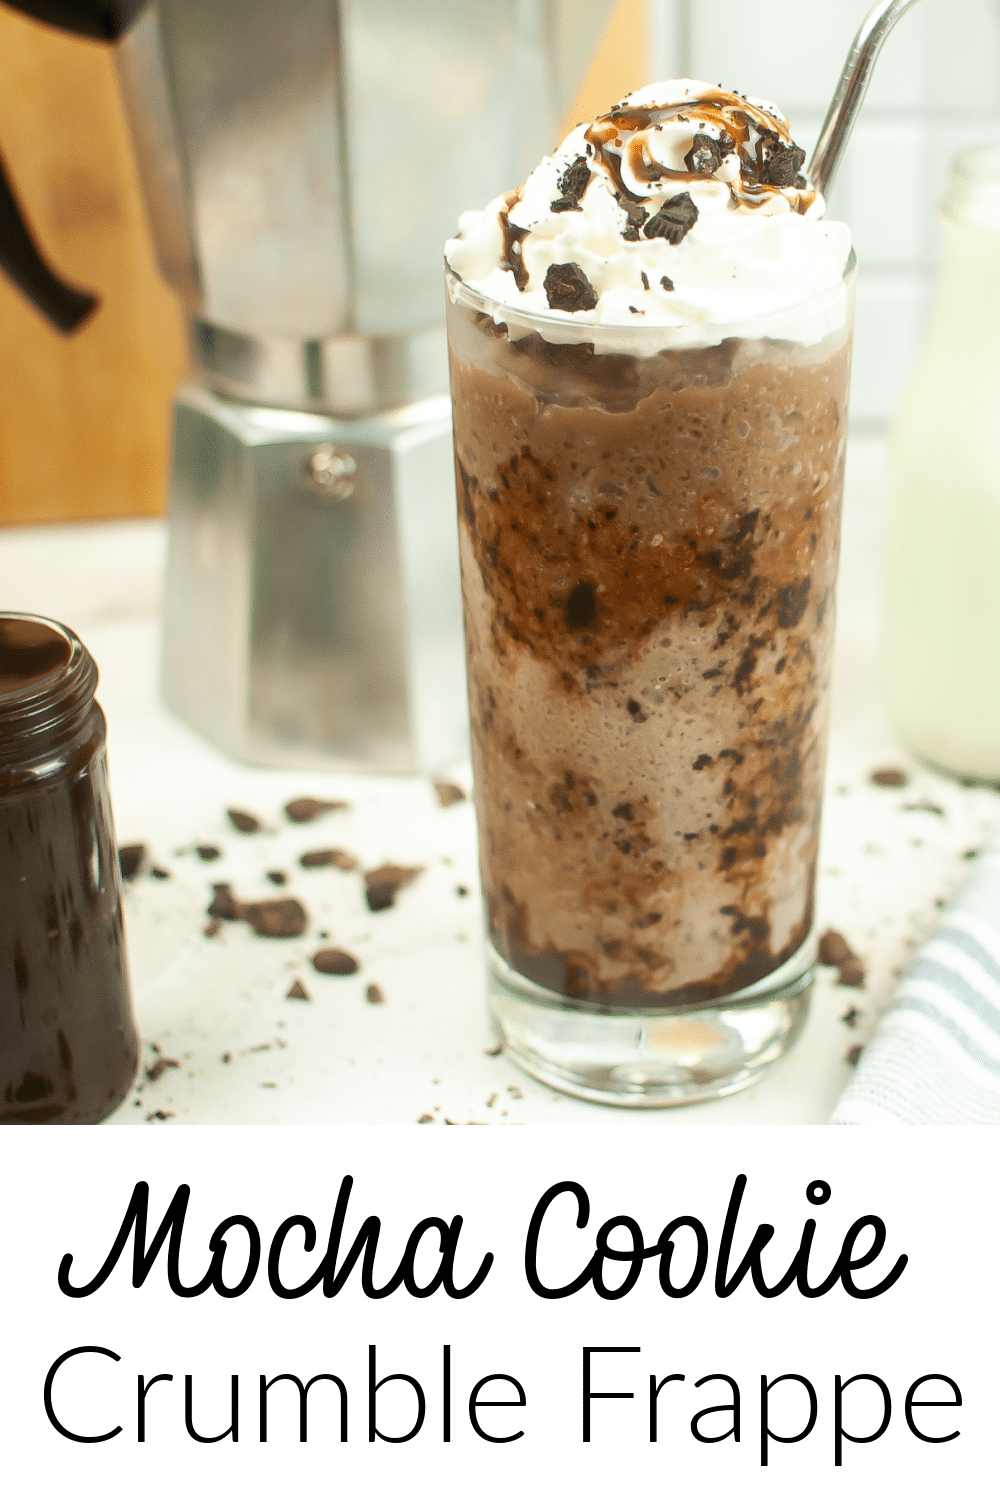 mocha Cookie Crumble Frappe